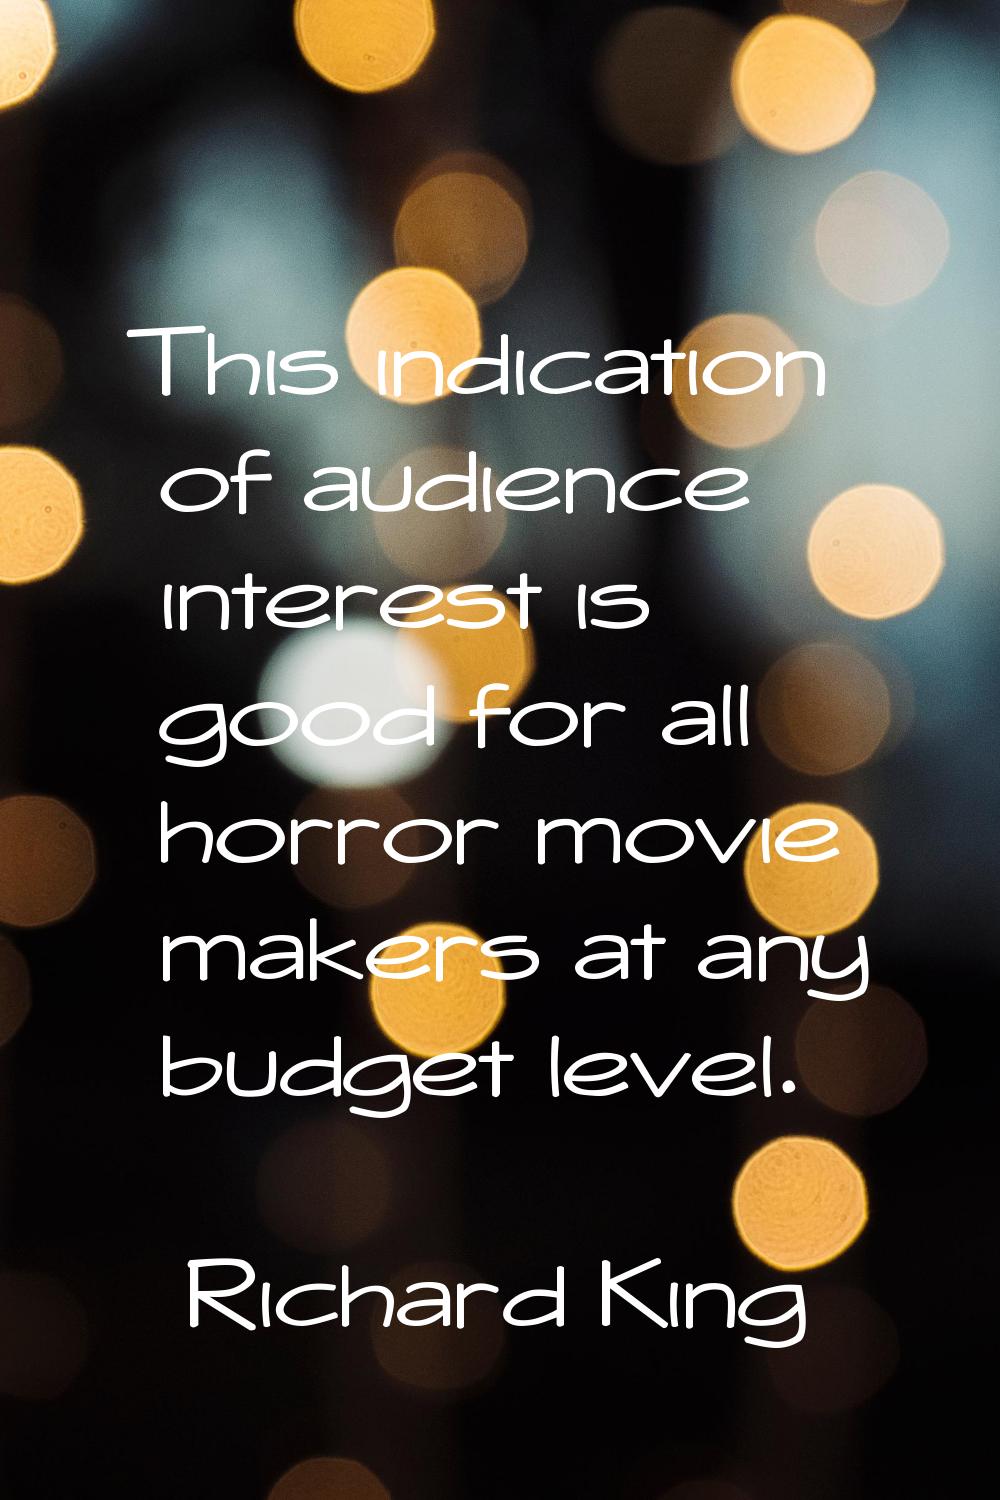 This indication of audience interest is good for all horror movie makers at any budget level.